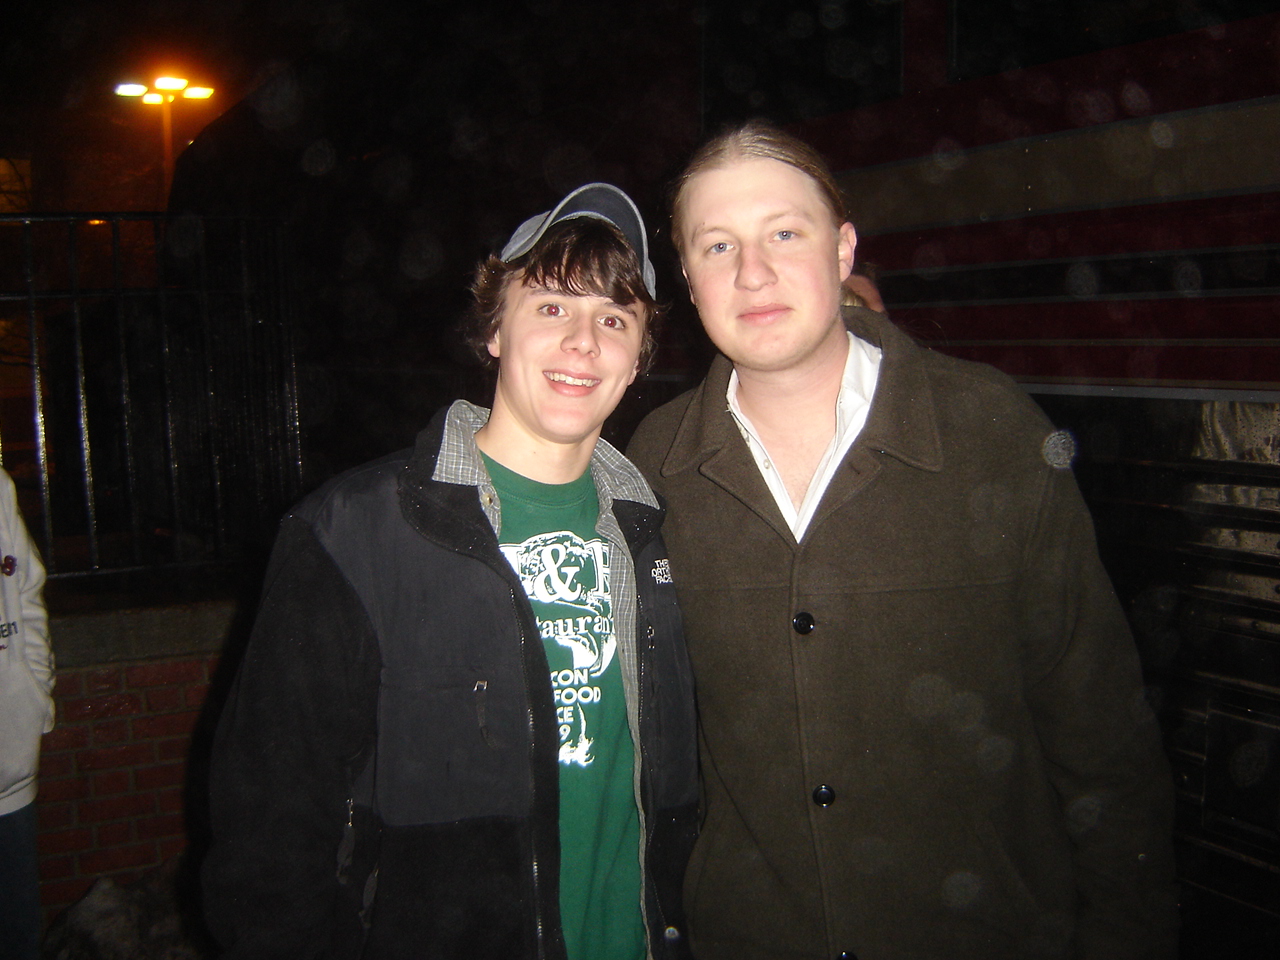 This is me and Derek after Ridgefield Playhouse show on 1/13/06 :)